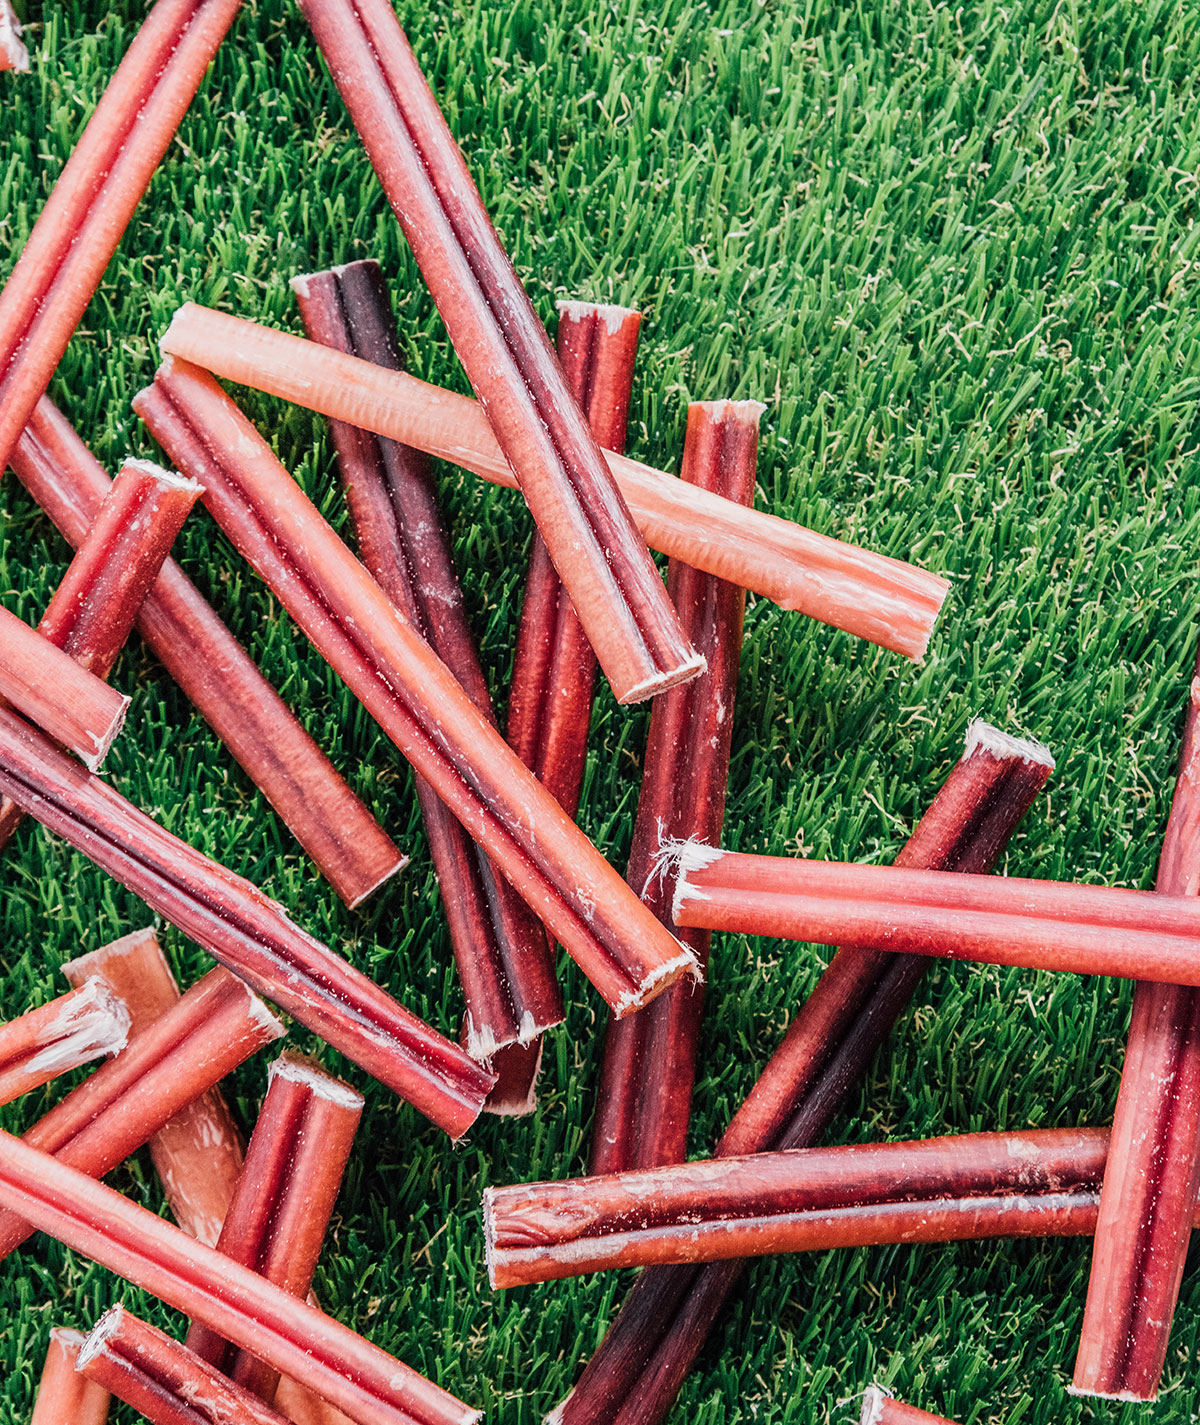 Bully sticks spread out on grass with some overlapped on each other.